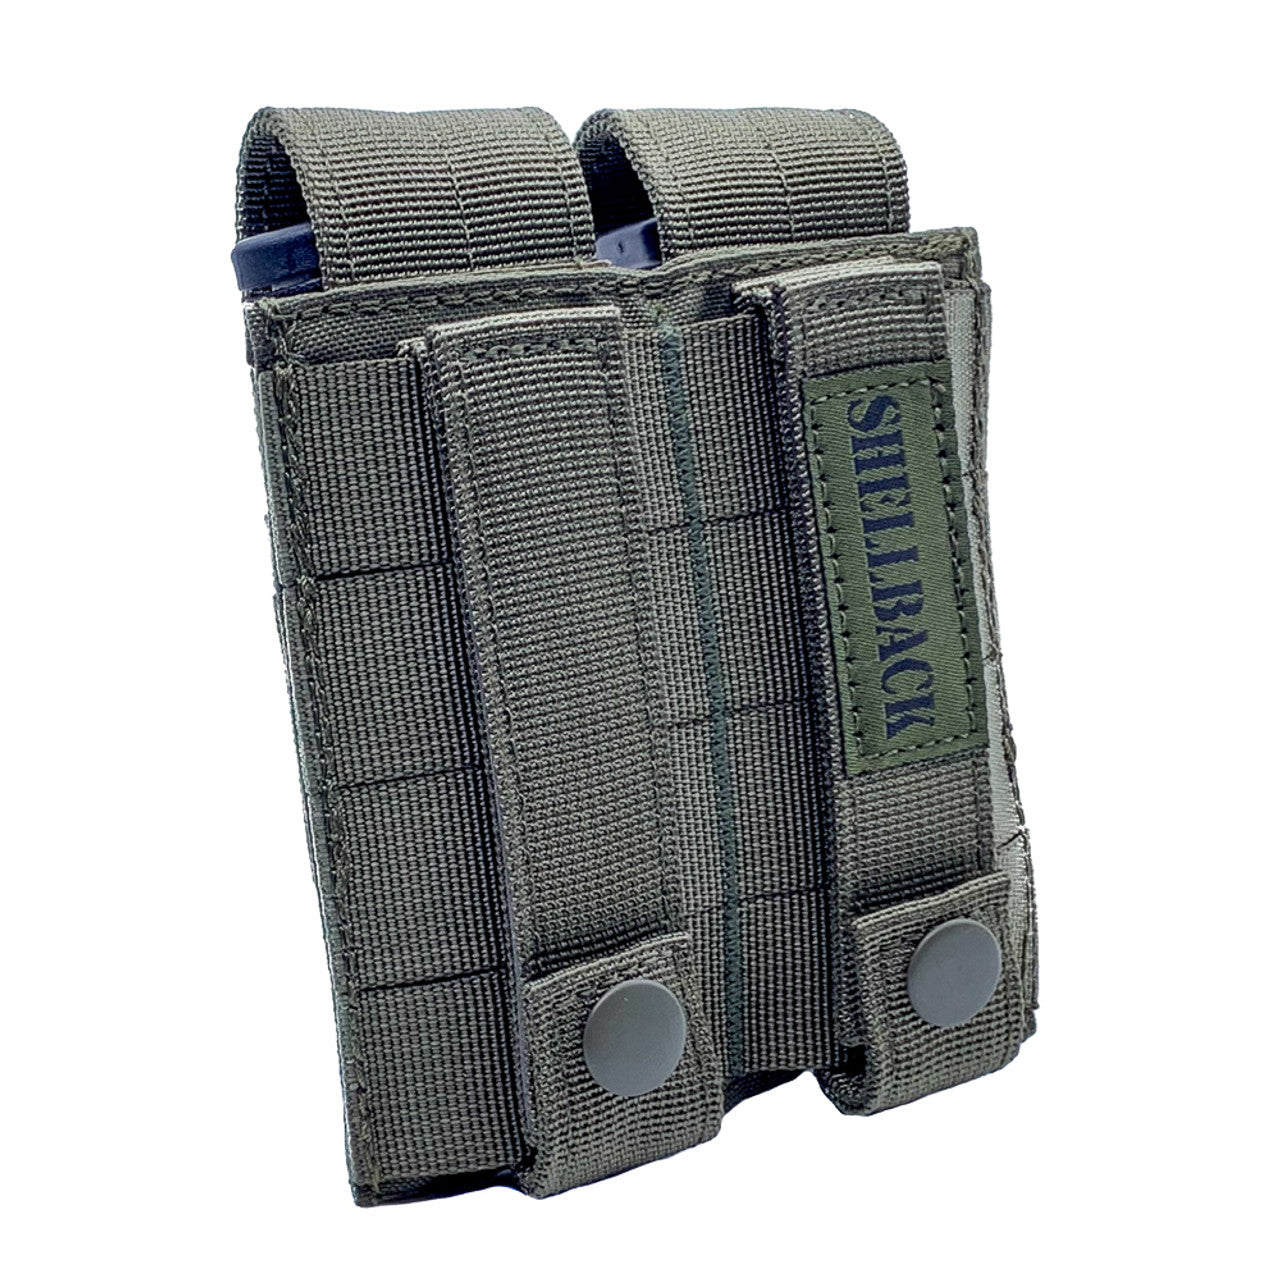 A pair of Shellback Tactical Double Pistol Mag Pouches on a white background.